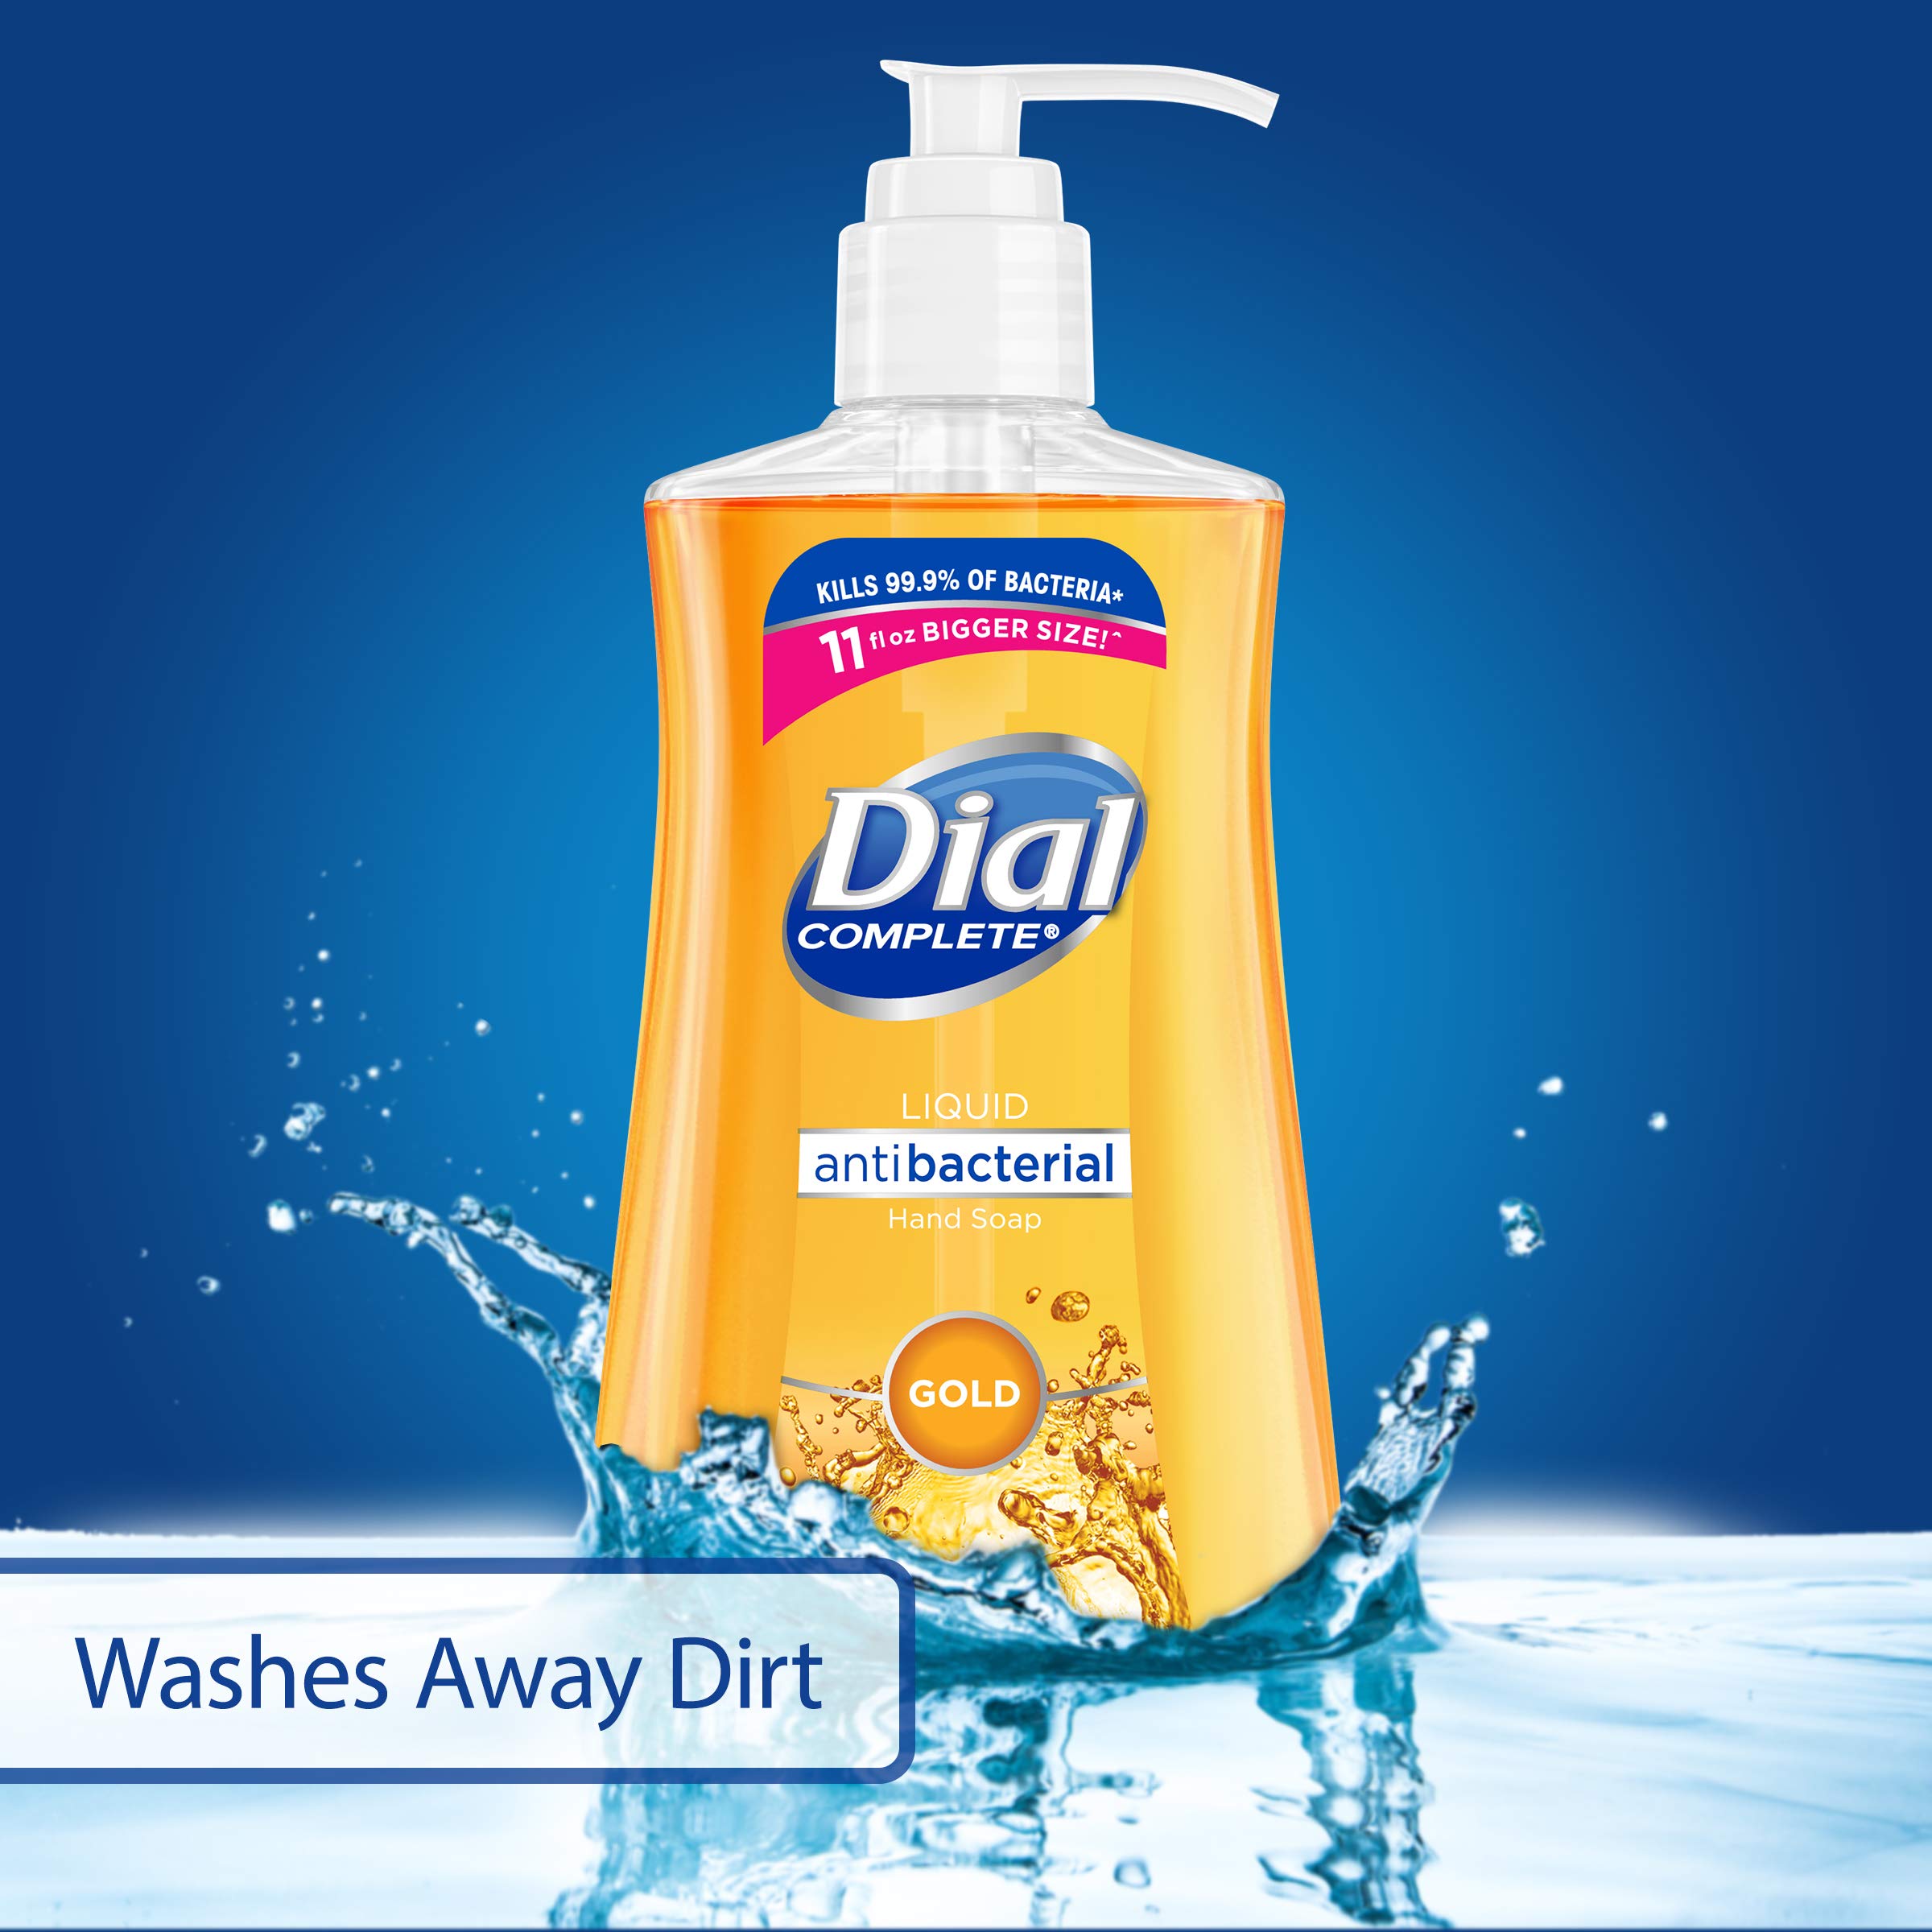 Dial Complete Antibacterial Liquid Hand Soap, Gold, 11 fl oz (Pack of 4)